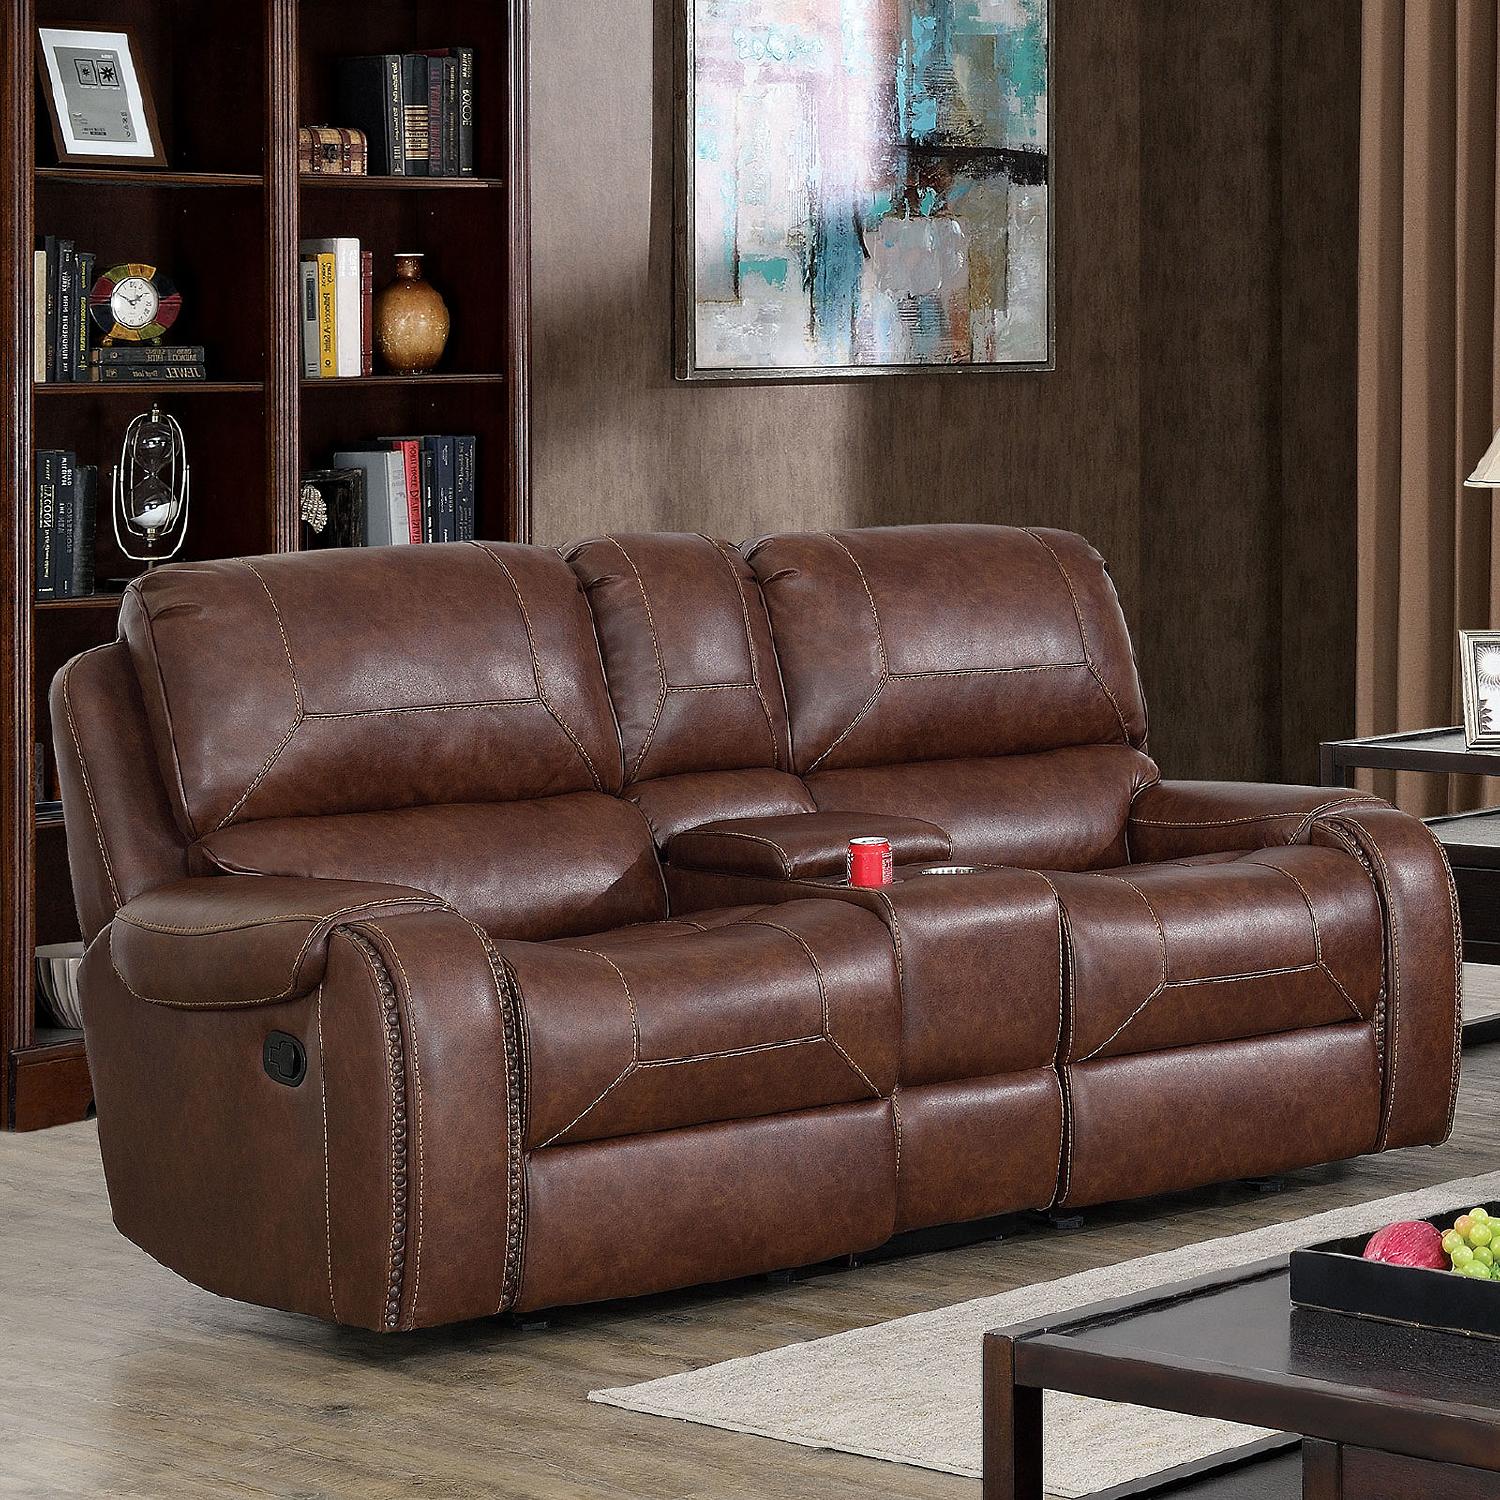 Transitional Power loveseat CM6950BR-LV-PM Walter CM6950BR-LV-PM in Brown Leatherette